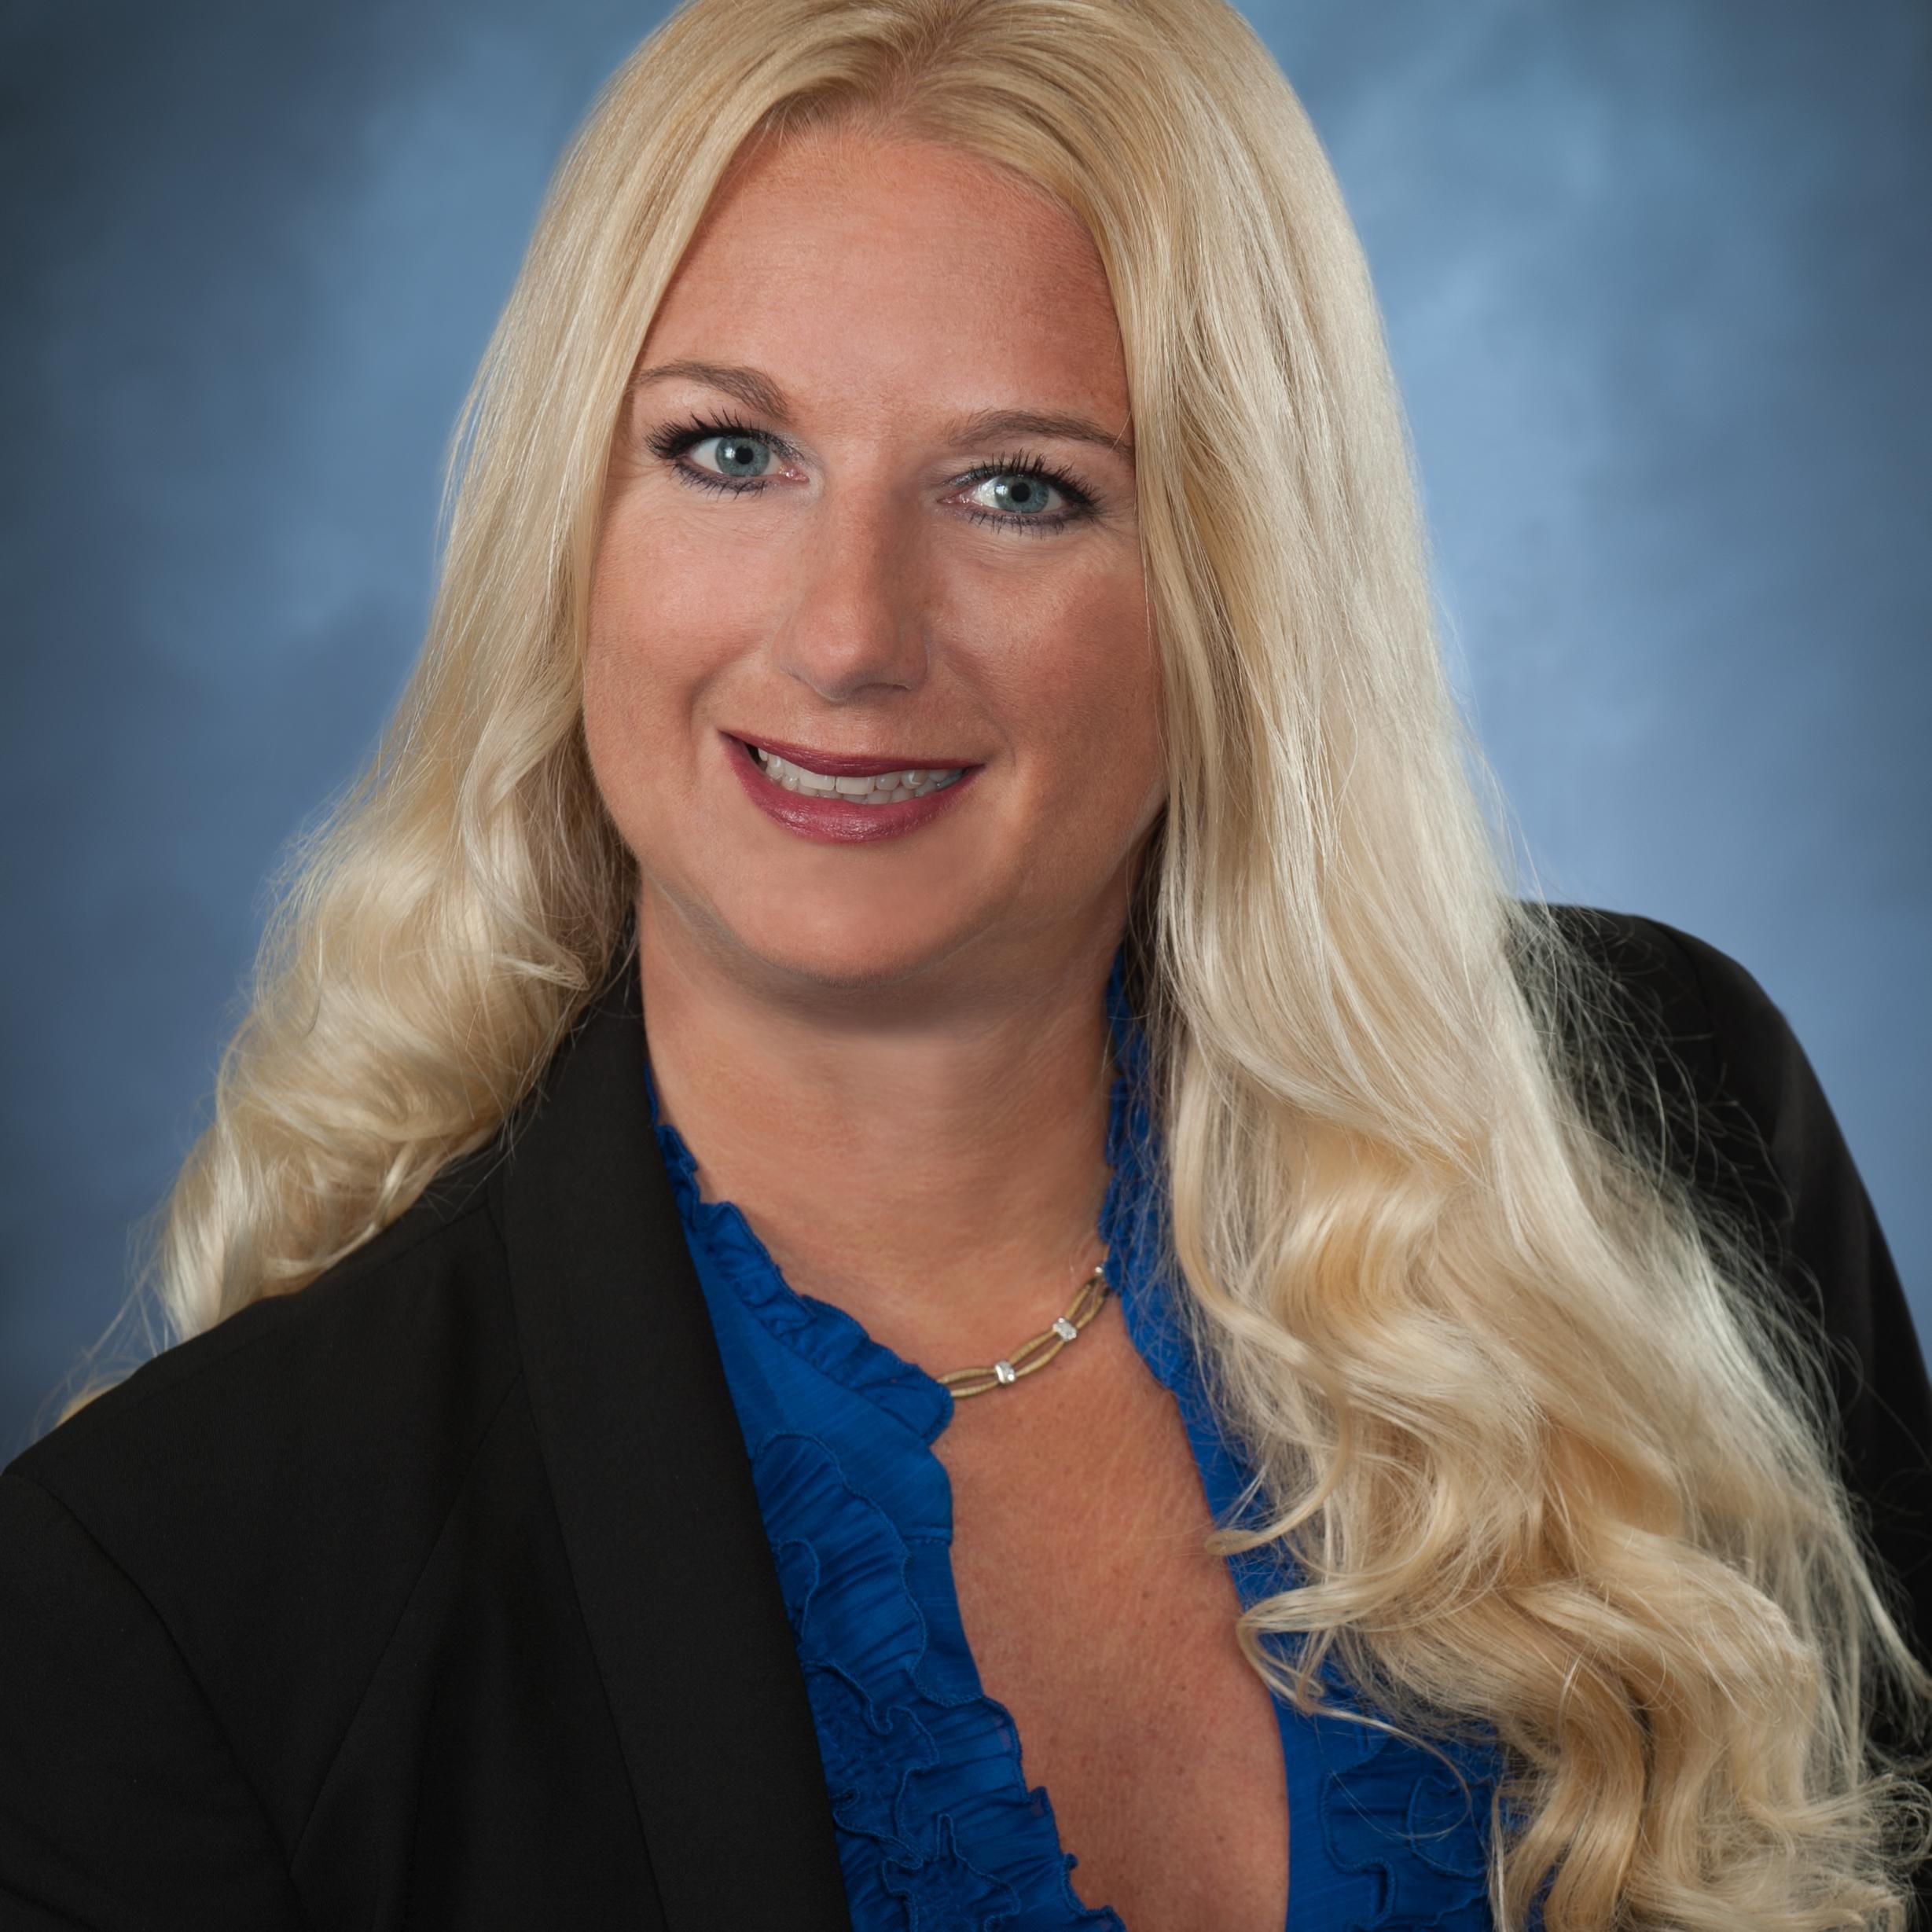 Jennifer is energetic, hardworking and always devoted to providing exceptional negotiation service to all of her clients.